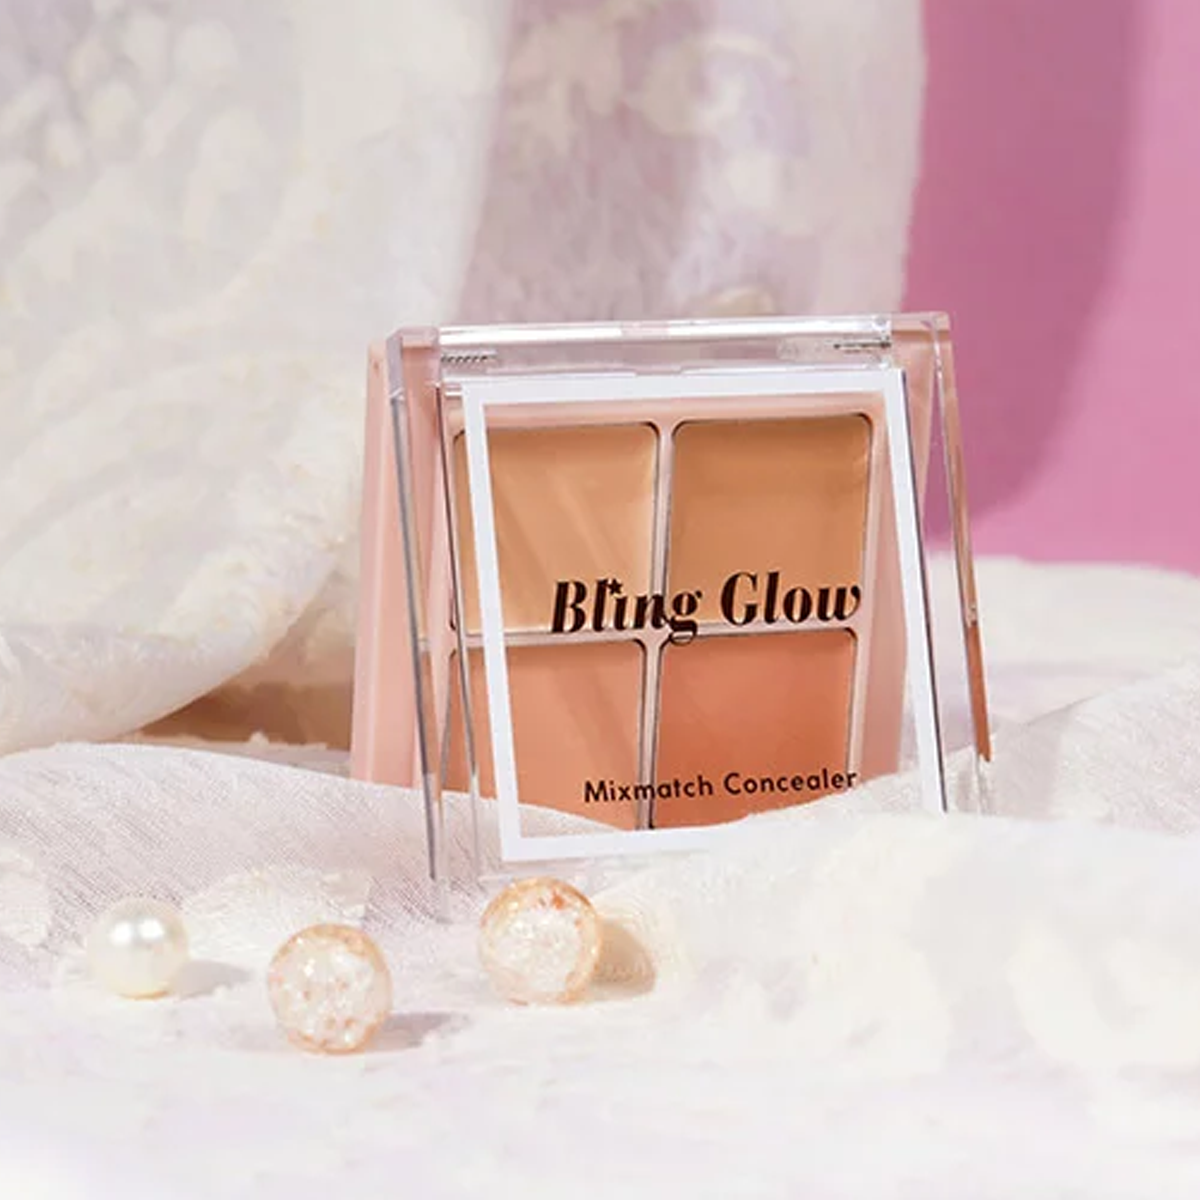 Bling Glow - Mix Match Concealer - Korean Makeup Cosmetic - Blend Color Compact Cream Glitter